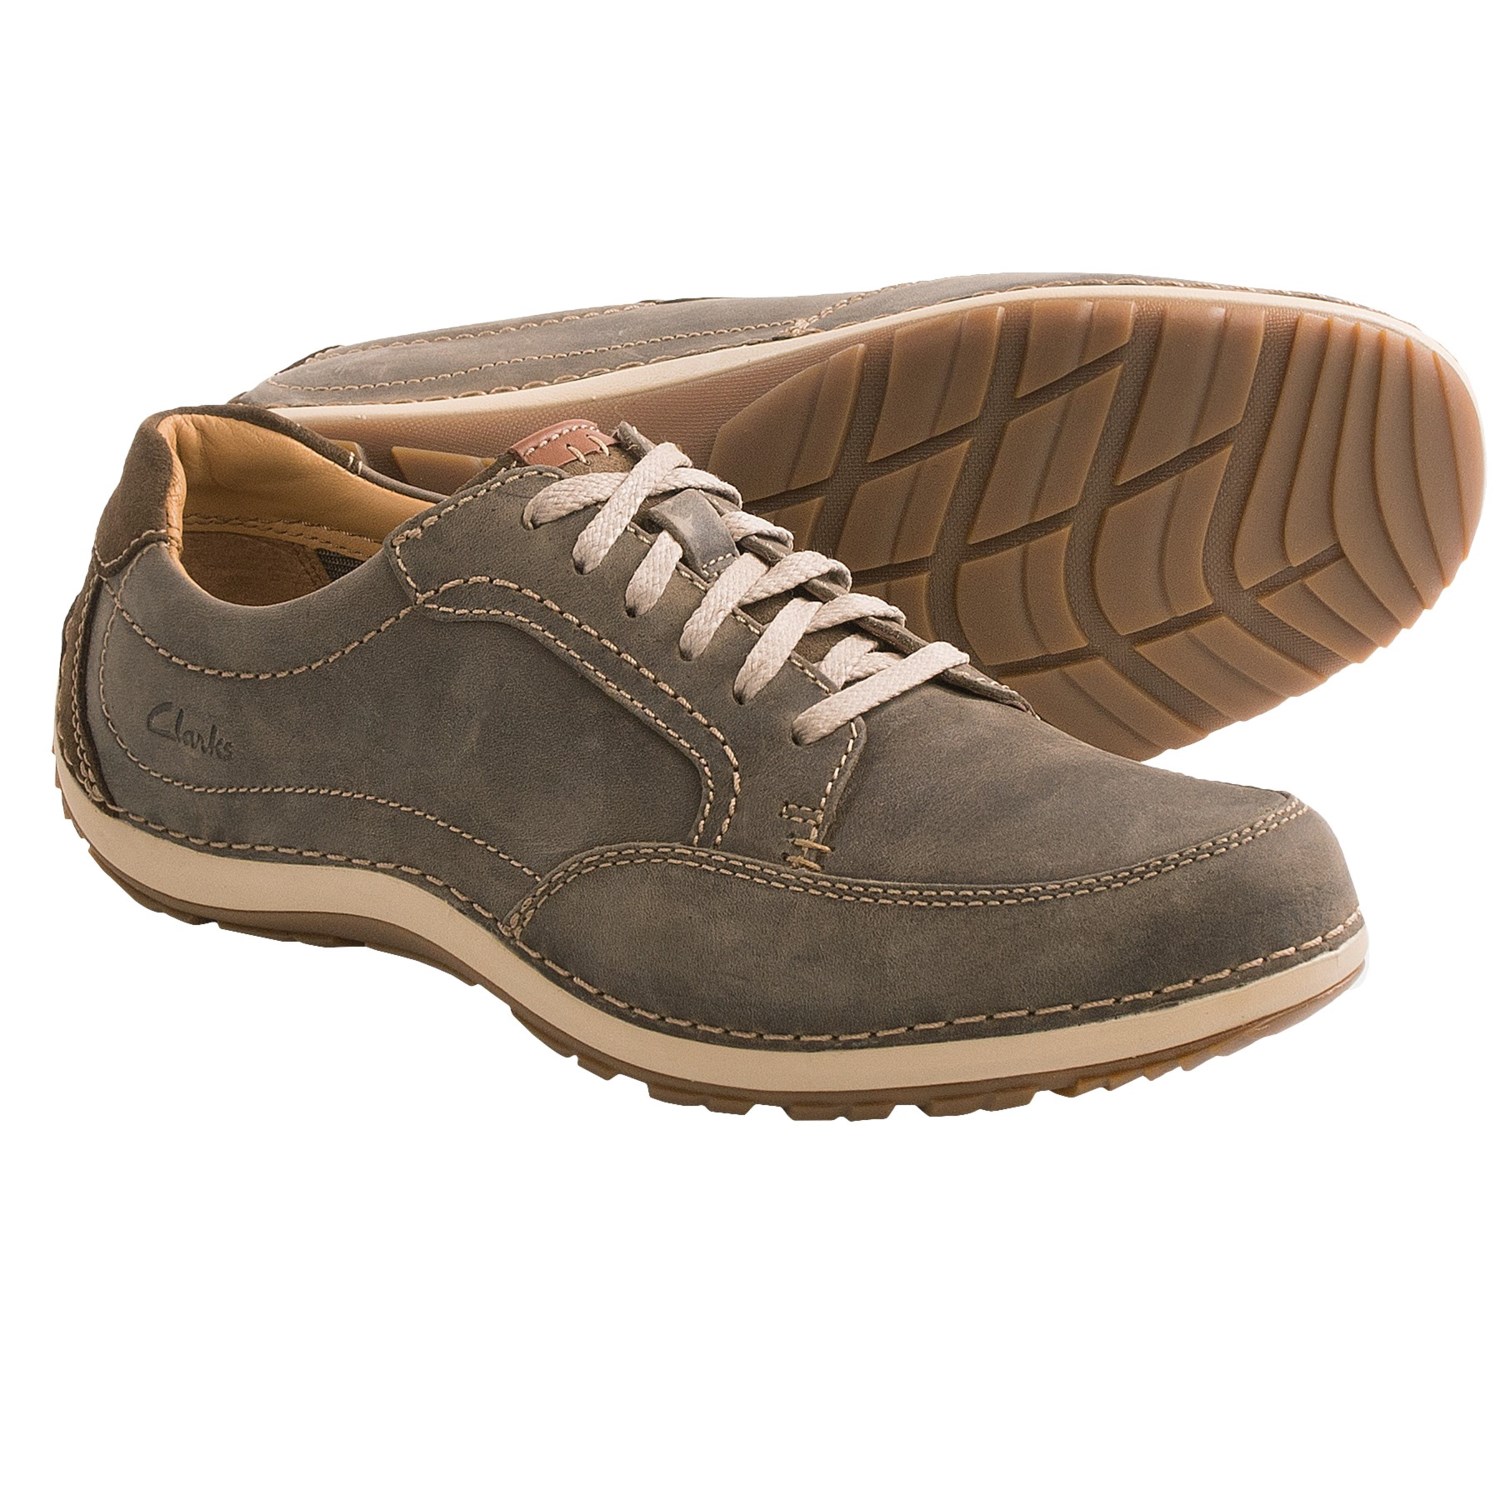 Clarks Shiply View Shoes (For Men) 7757H - Save 33%